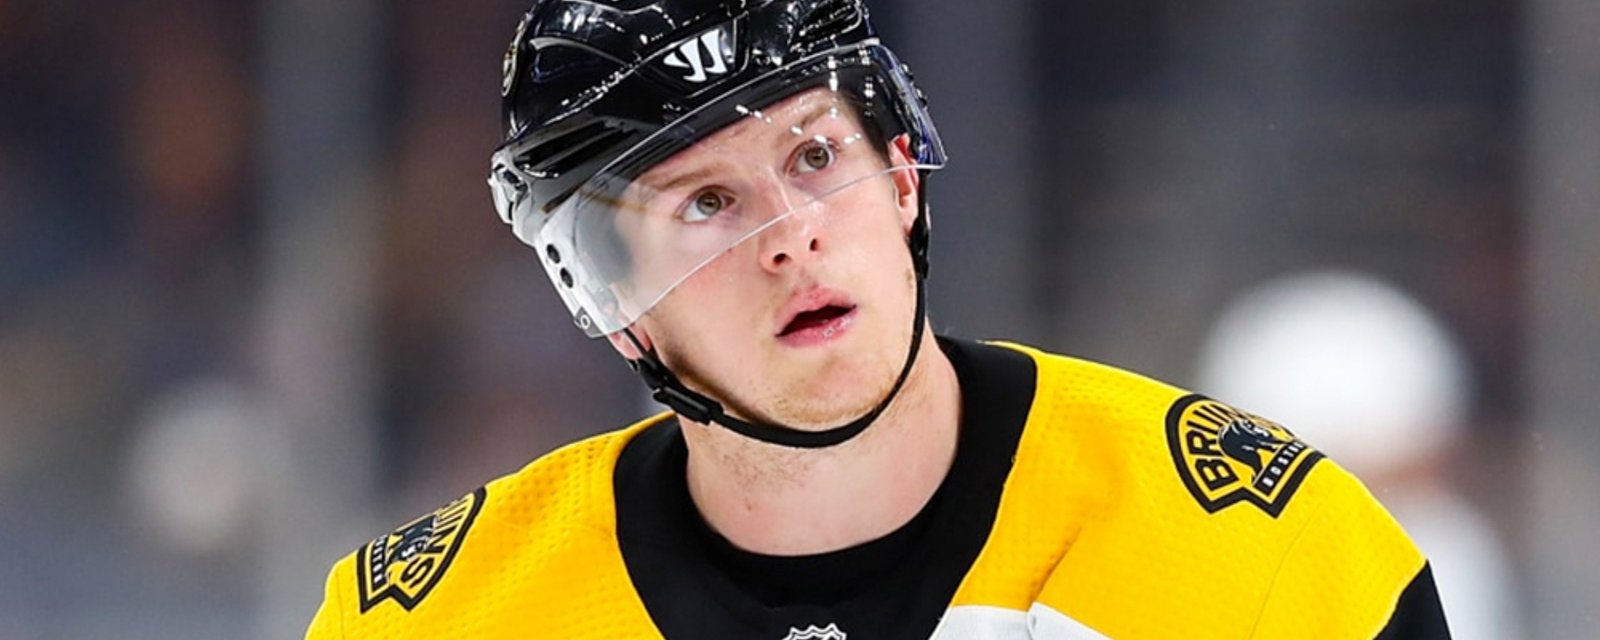 Cassidy’s plans for 2020 season without Krug